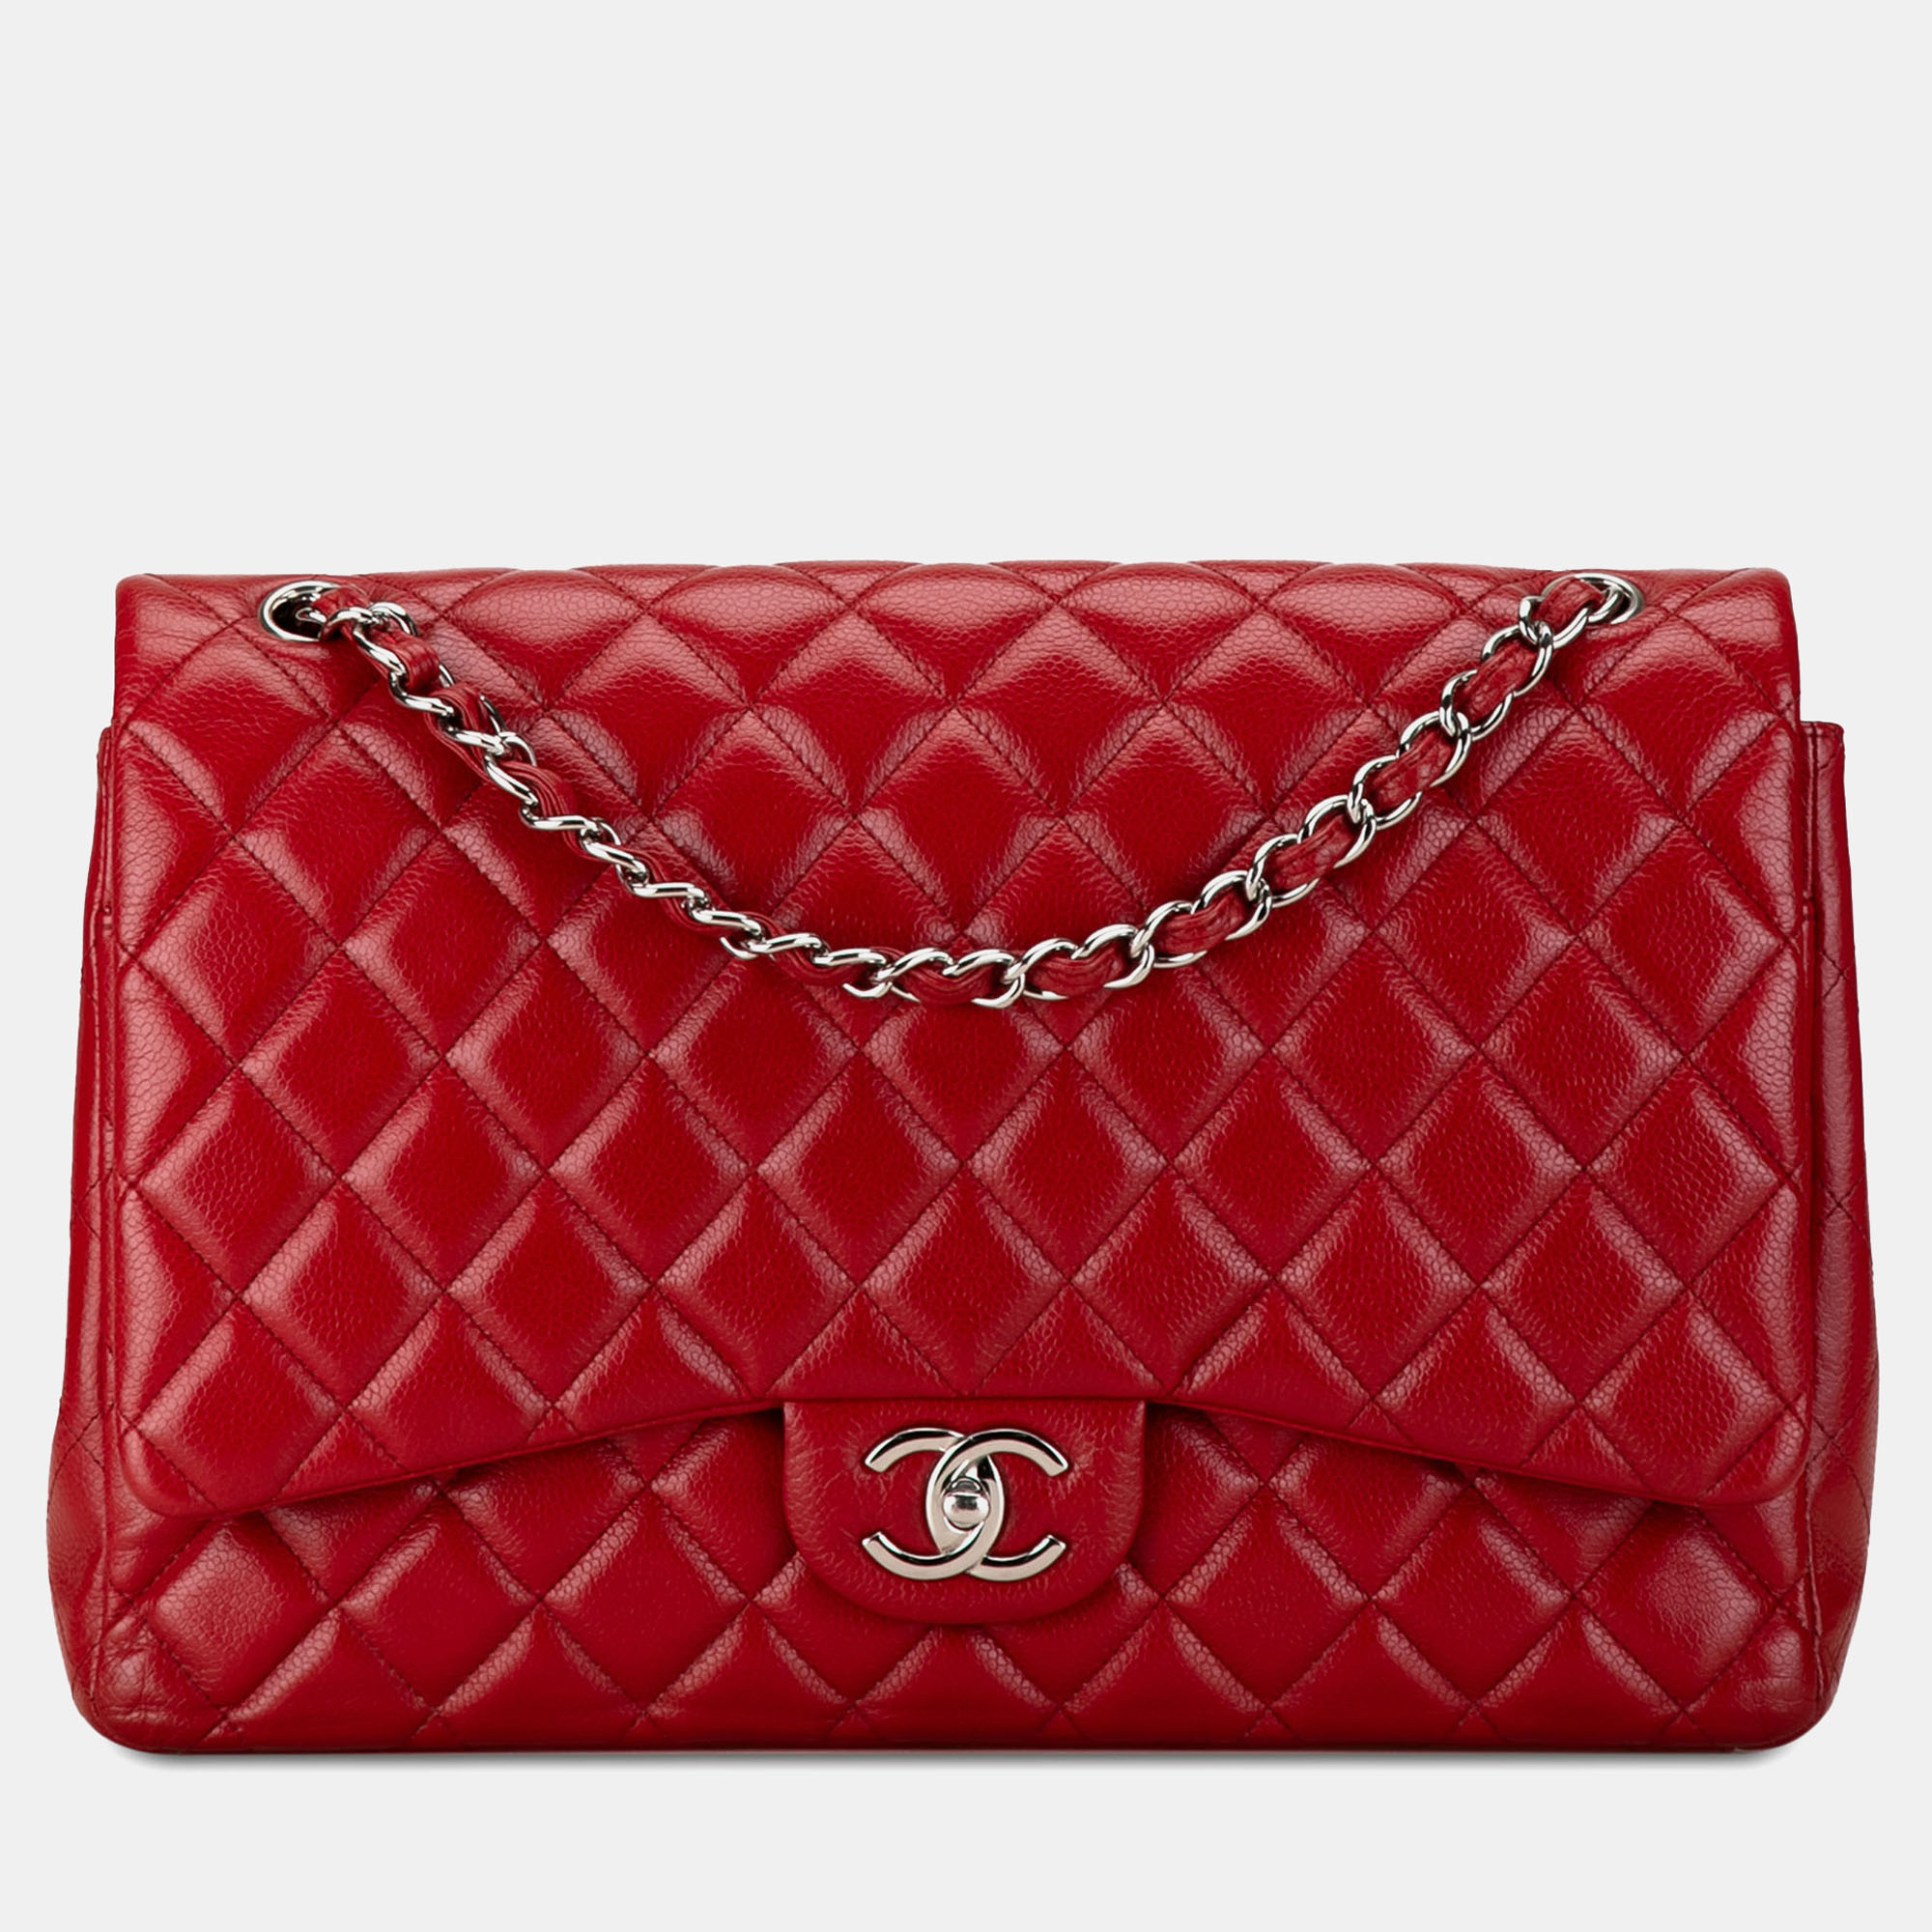 

Chanel Maxi Classic Caviar Double Flap Bag, Red